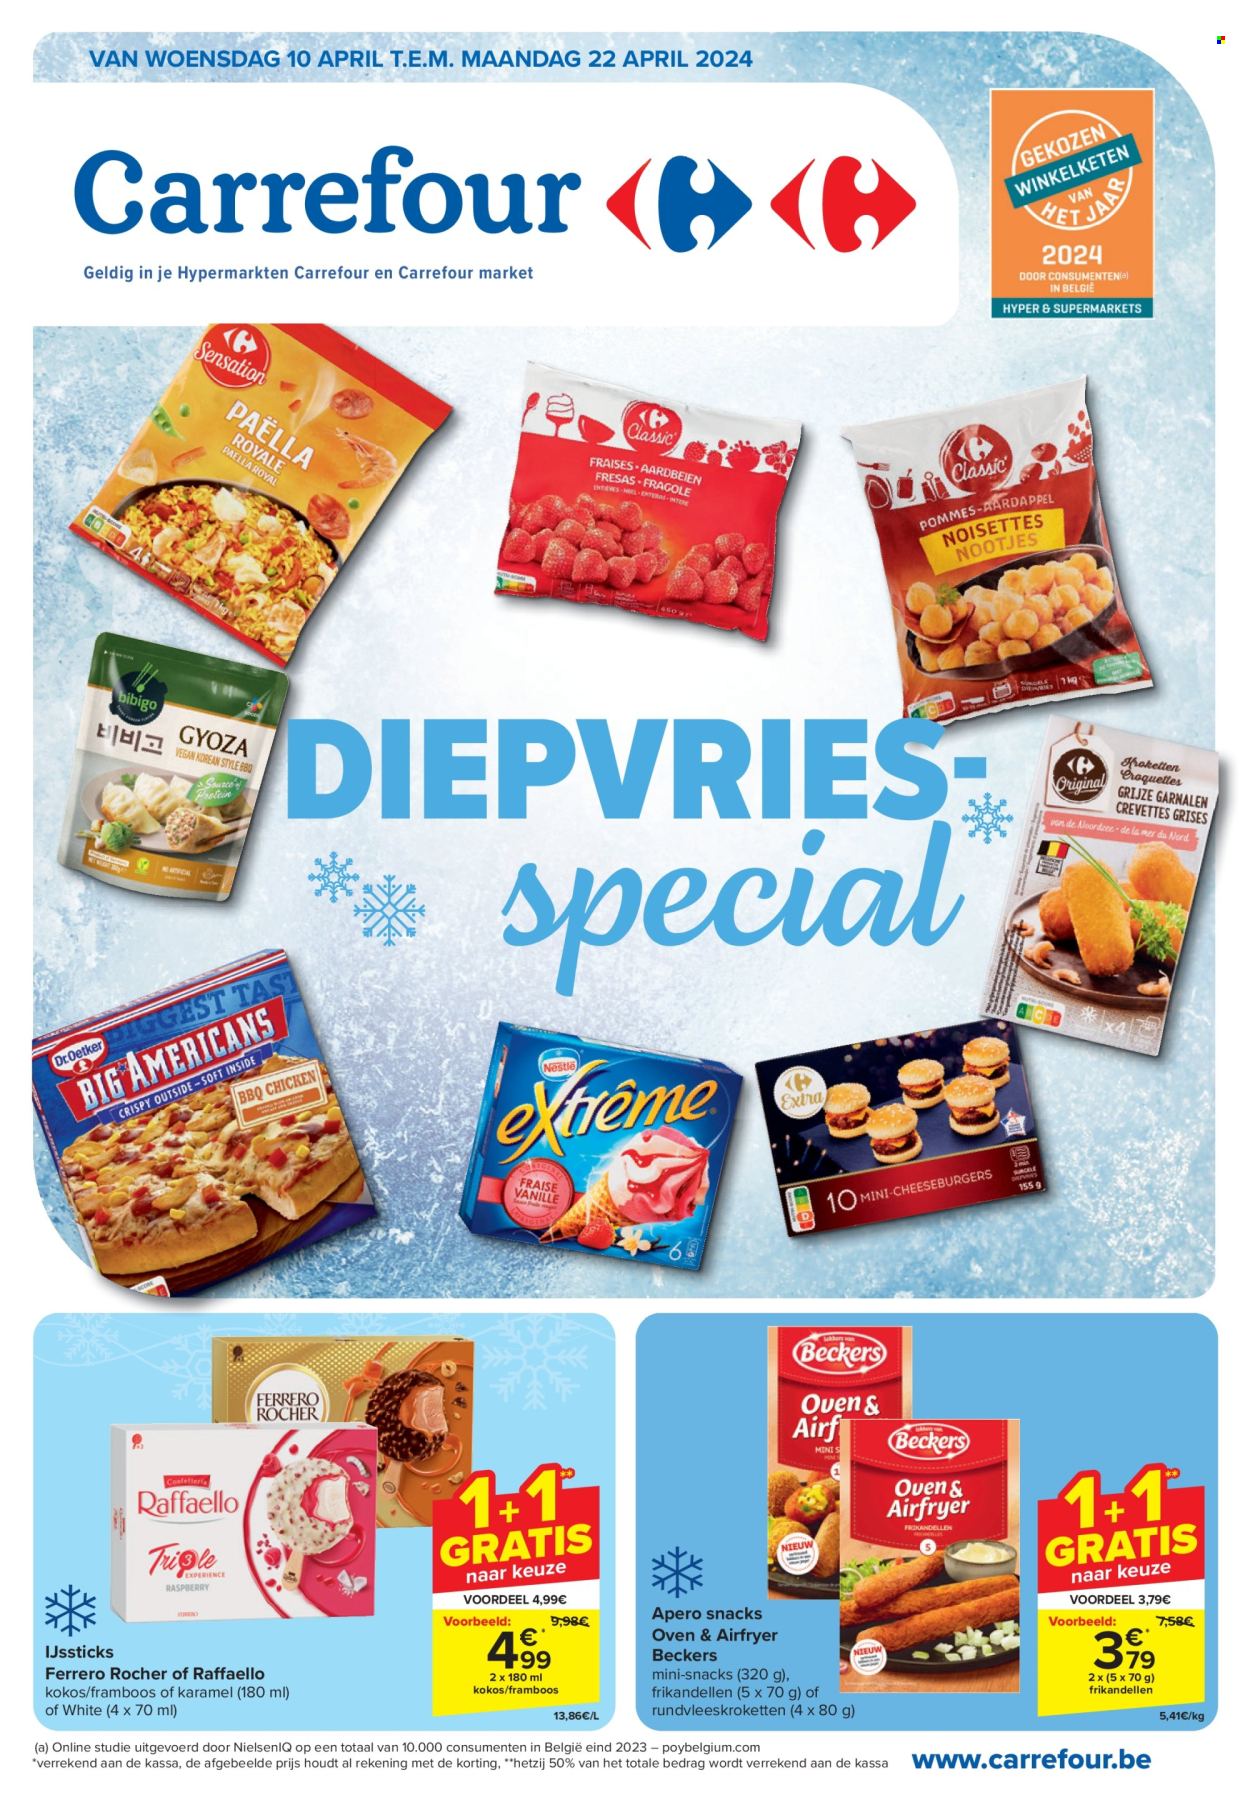 Catalogue Carrefour hypermarkt - 10.4.2024 - 22.4.2024. Page 1.